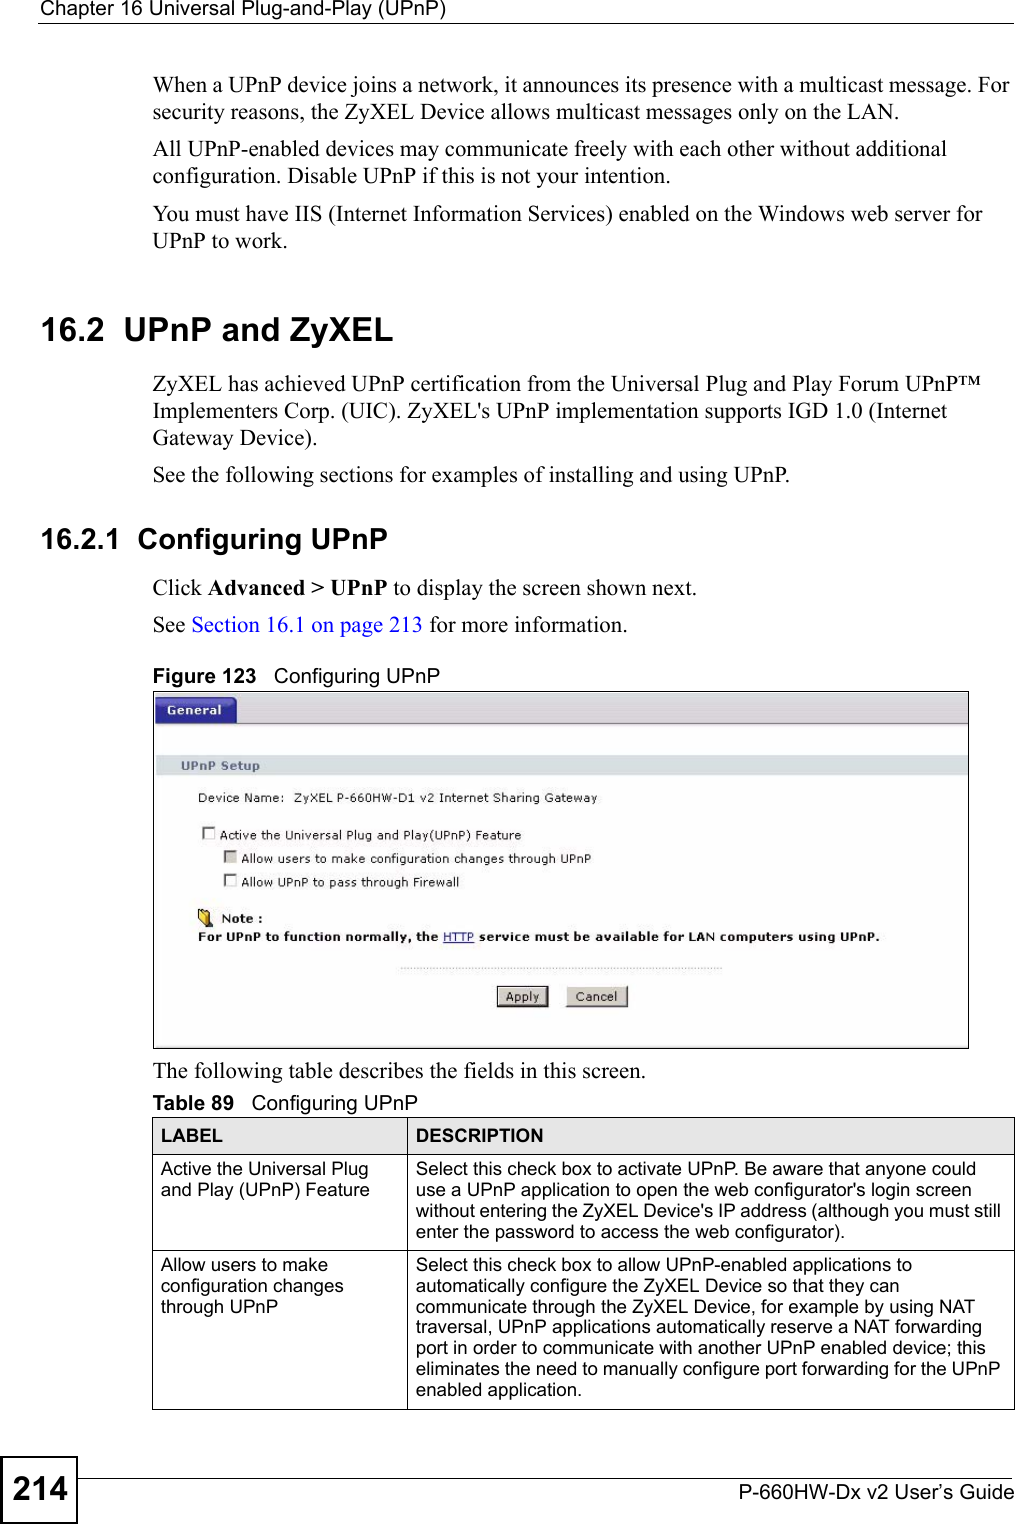 Chapter 16 Universal Plug-and-Play (UPnP)P-660HW-Dx v2 User’s Guide214When a UPnP device joins a network, it announces its presence with a multicast message. For security reasons, the ZyXEL Device allows multicast messages only on the LAN.All UPnP-enabled devices may communicate freely with each other without additional configuration. Disable UPnP if this is not your intention. You must have IIS (Internet Information Services) enabled on the Windows web server for UPnP to work.16.2  UPnP and ZyXELZyXEL has achieved UPnP certification from the Universal Plug and Play Forum UPnP™ Implementers Corp. (UIC). ZyXEL&apos;s UPnP implementation supports IGD 1.0 (Internet Gateway Device). See the following sections for examples of installing and using UPnP.16.2.1  Configuring UPnP Click Advanced &gt; UPnP to display the screen shown next.See Section 16.1 on page 213 for more information. Figure 123   Configuring UPnPThe following table describes the fields in this screen.Table 89   Configuring UPnPLABEL DESCRIPTIONActive the Universal Plug and Play (UPnP) Feature Select this check box to activate UPnP. Be aware that anyone could use a UPnP application to open the web configurator&apos;s login screen without entering the ZyXEL Device&apos;s IP address (although you must still enter the password to access the web configurator).Allow users to make configuration changes through UPnPSelect this check box to allow UPnP-enabled applications to automatically configure the ZyXEL Device so that they can communicate through the ZyXEL Device, for example by using NAT traversal, UPnP applications automatically reserve a NAT forwarding port in order to communicate with another UPnP enabled device; this eliminates the need to manually configure port forwarding for the UPnP enabled application. 